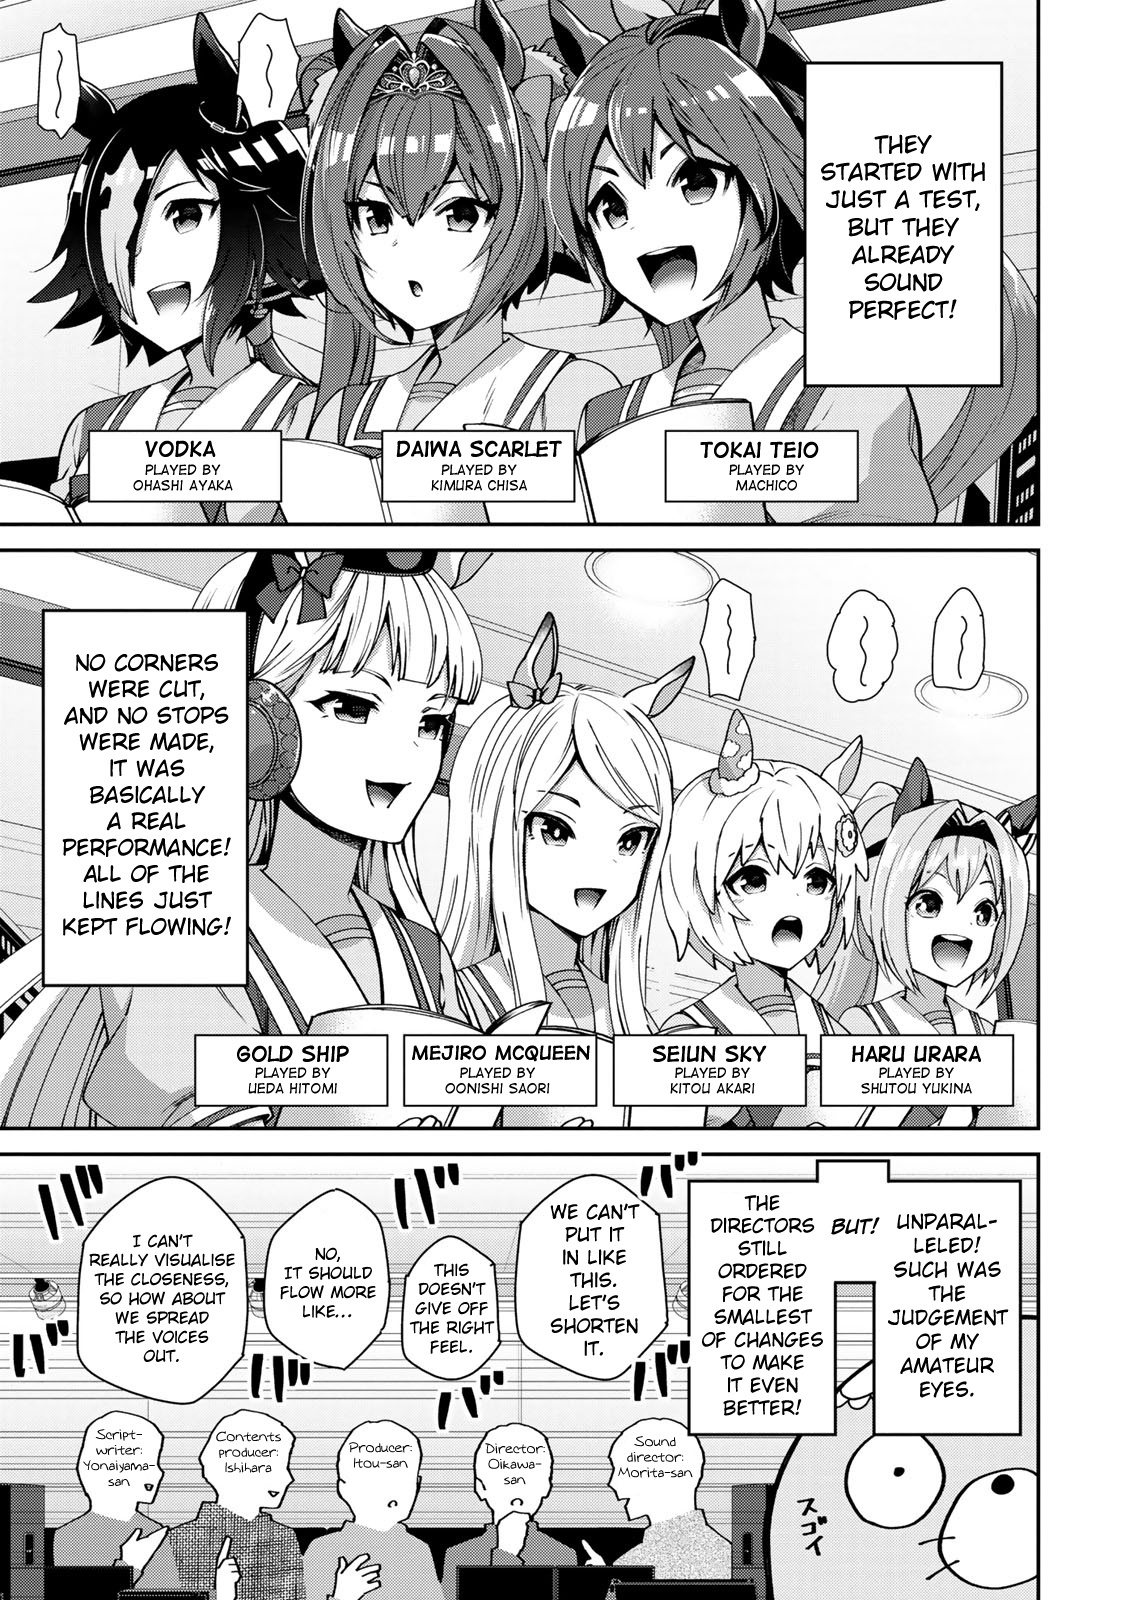 Starting Gate! Uma Musume Pretty Derby Vol.3 Chapter 19.5: Extra 1: Dubbing Report - Picture 3